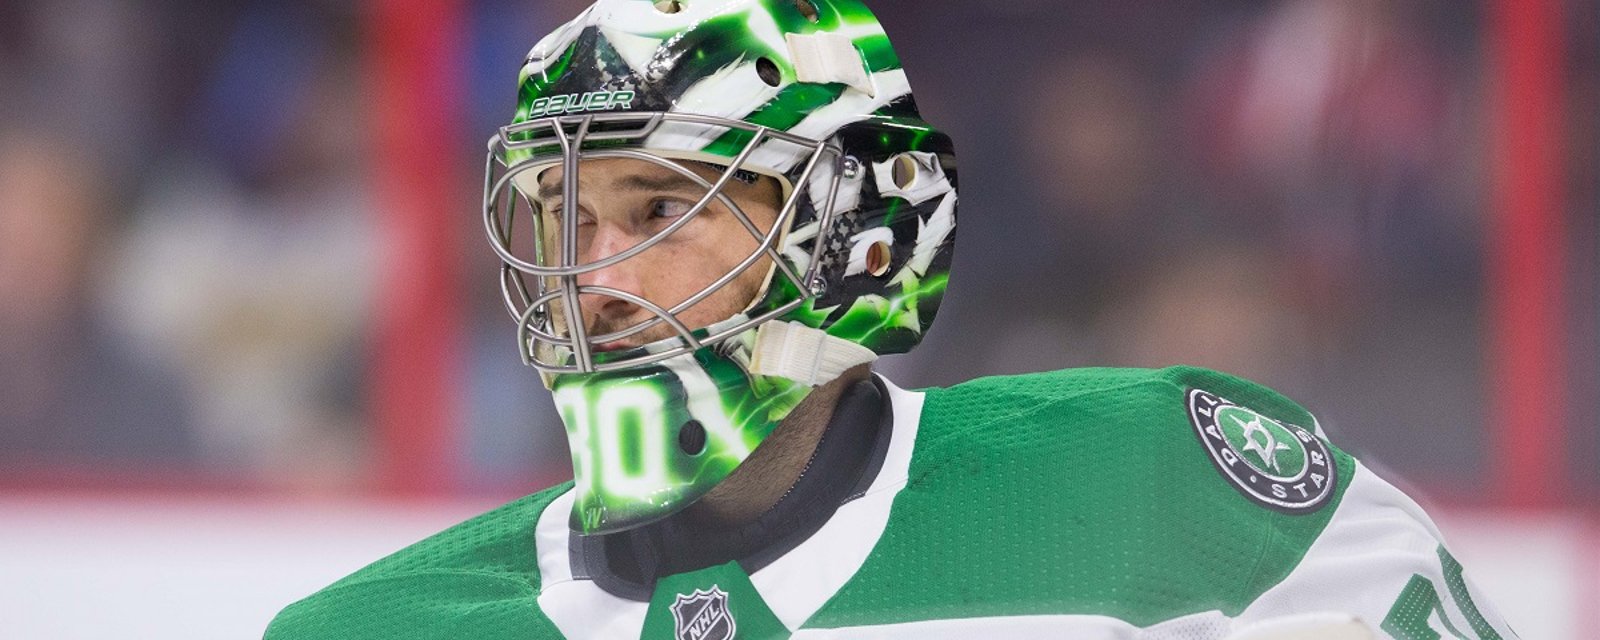 Ben Bishop calls out his own team, but buries the Red Wings in the process.